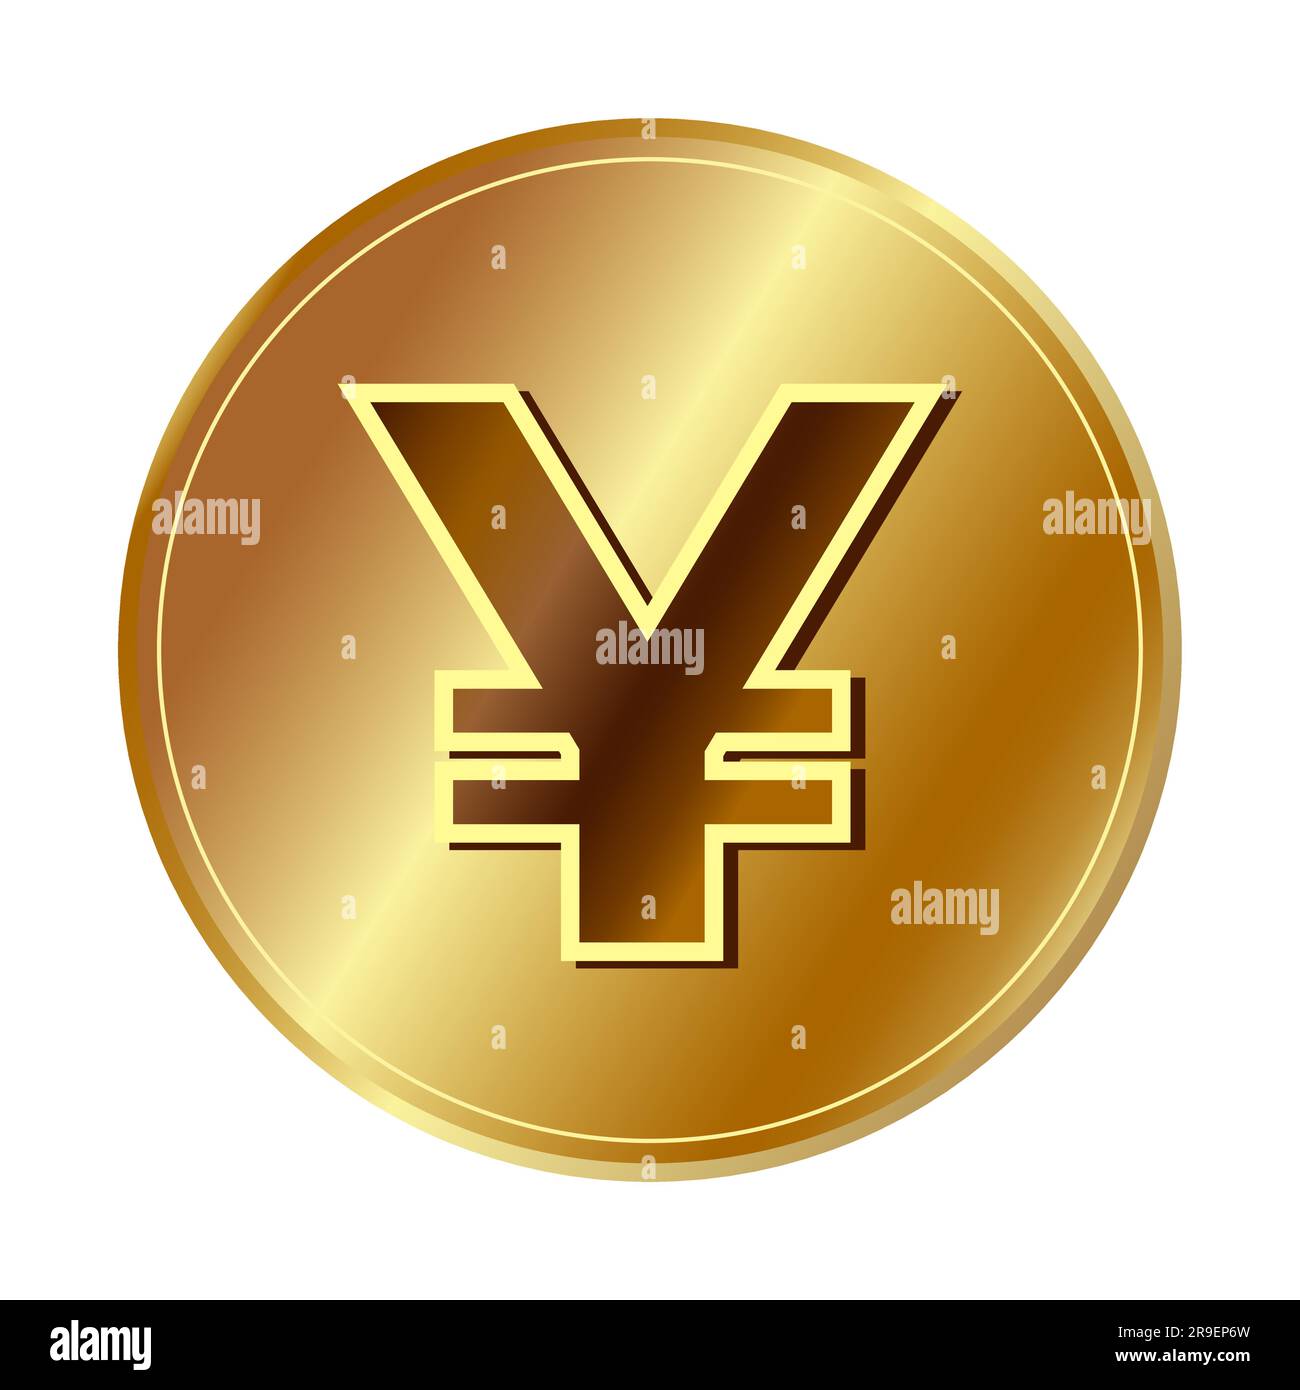 Gold yen, yuan symbol Golden coin icon Money design Currency sign in gold Vector illustration Isolated on white background Stock Vector